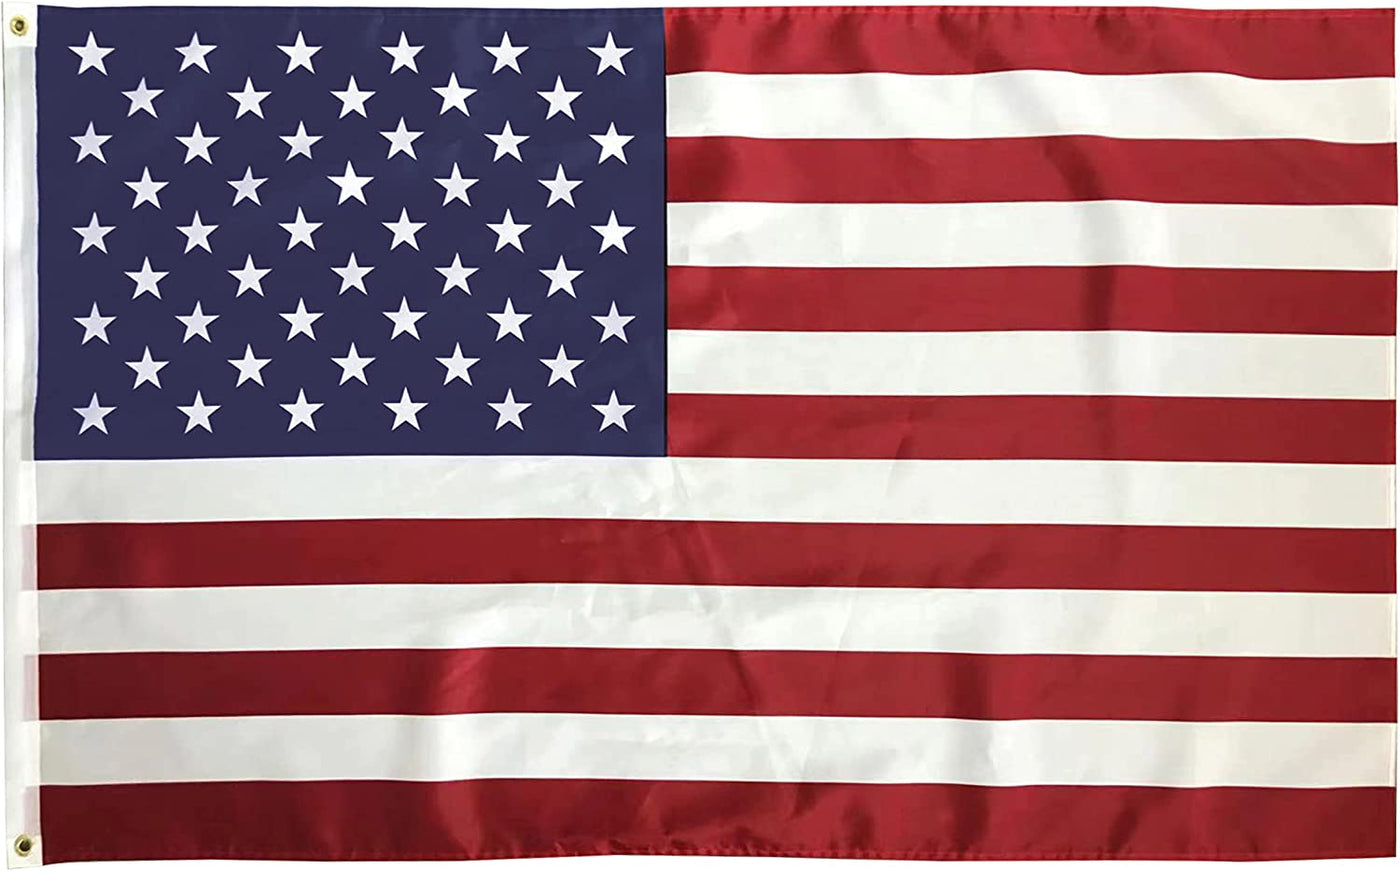 American 3X5-USA 3x5 Feet Outdoor, Heavy Duty Nylon US Flags with Embroidered Stars, Sewn Stripes and Brass Grommets, Red, White, Blue